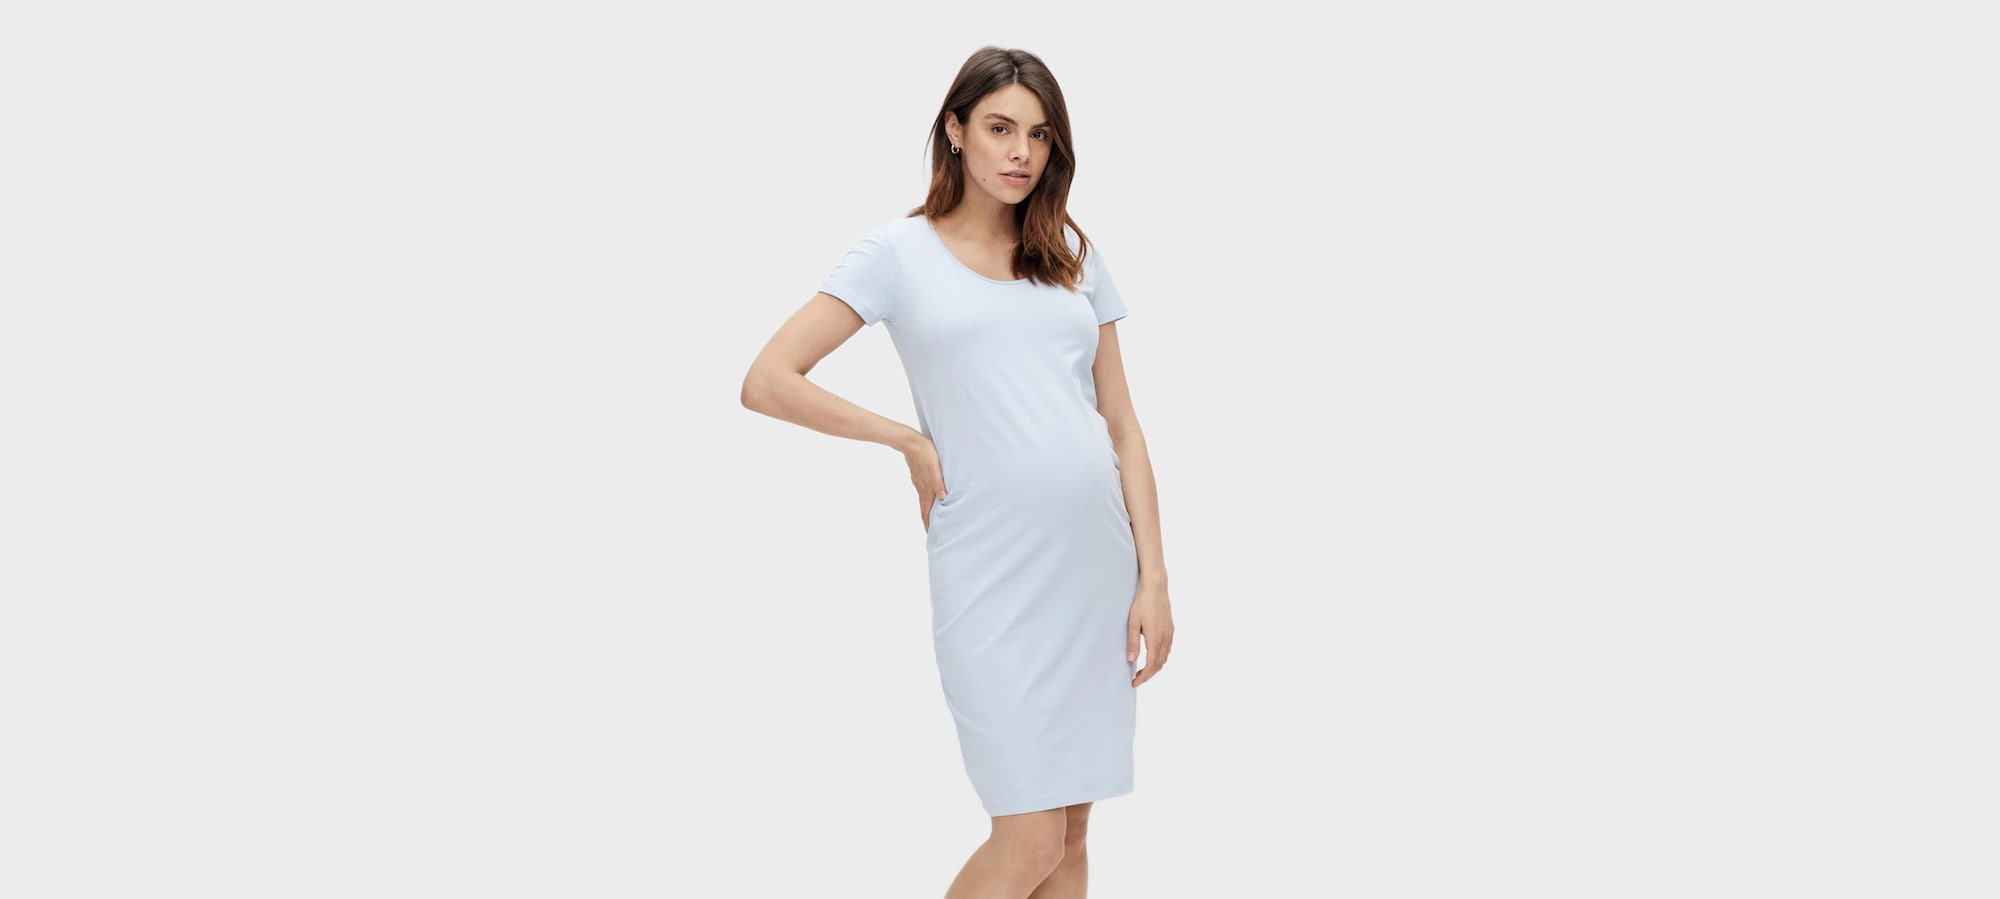 For the first trimester Trendy dresses